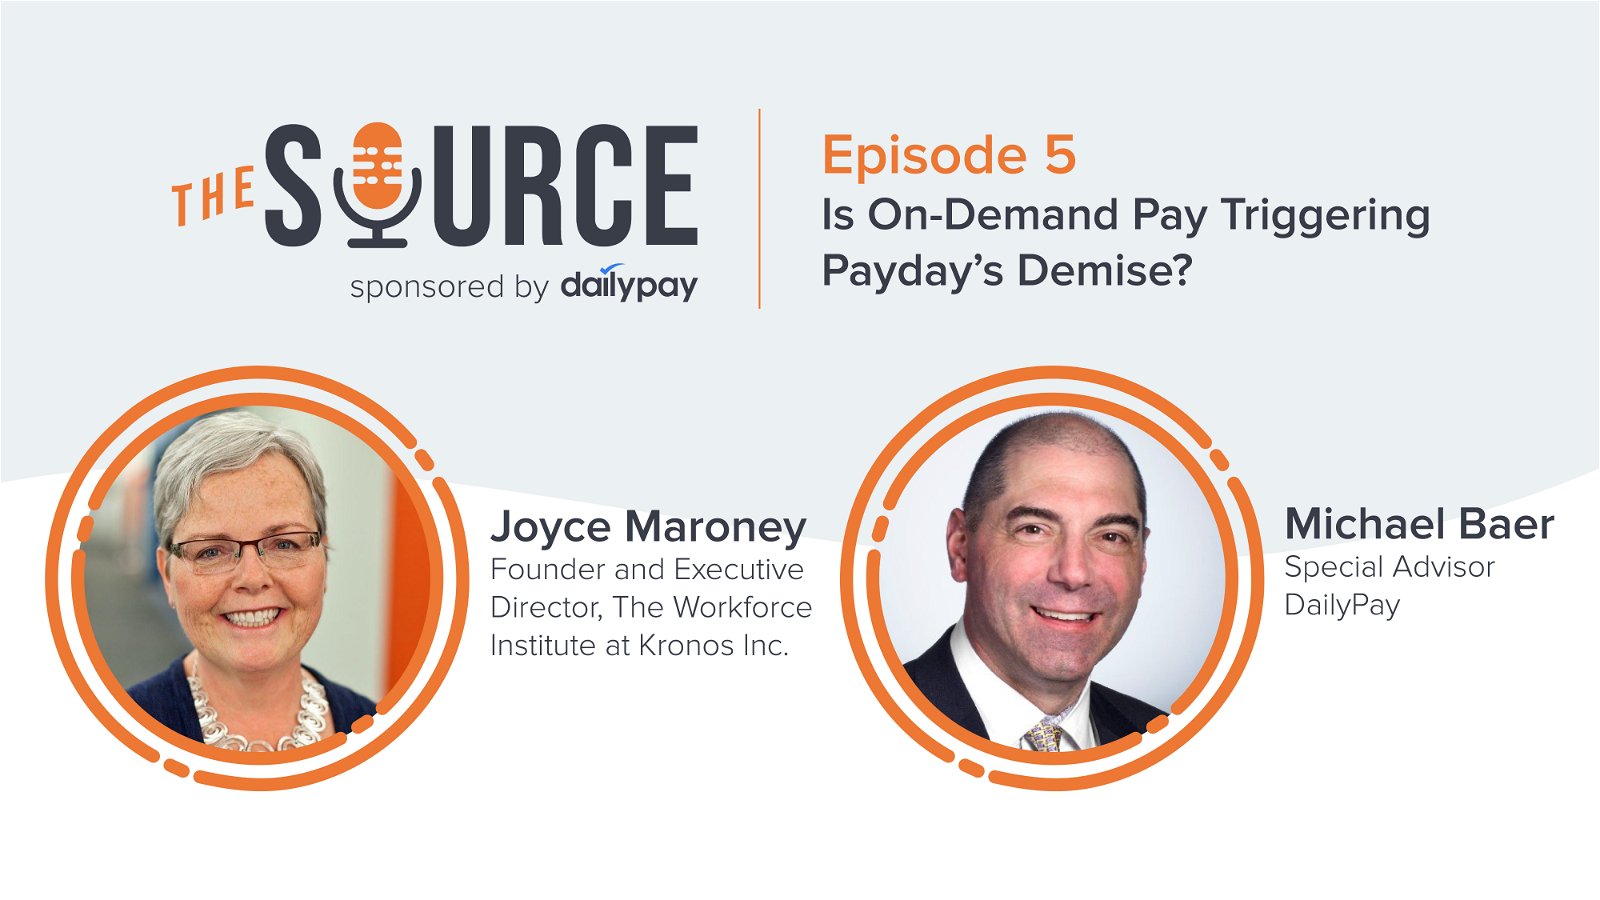 Promotional image for "The Source" podcast Episode 5, featuring guests Joyce Parony, Founder and Executive Director at Kronos Inc., and Michael Baer, Special Advisor at DailyPay, discussing on-demand pay.